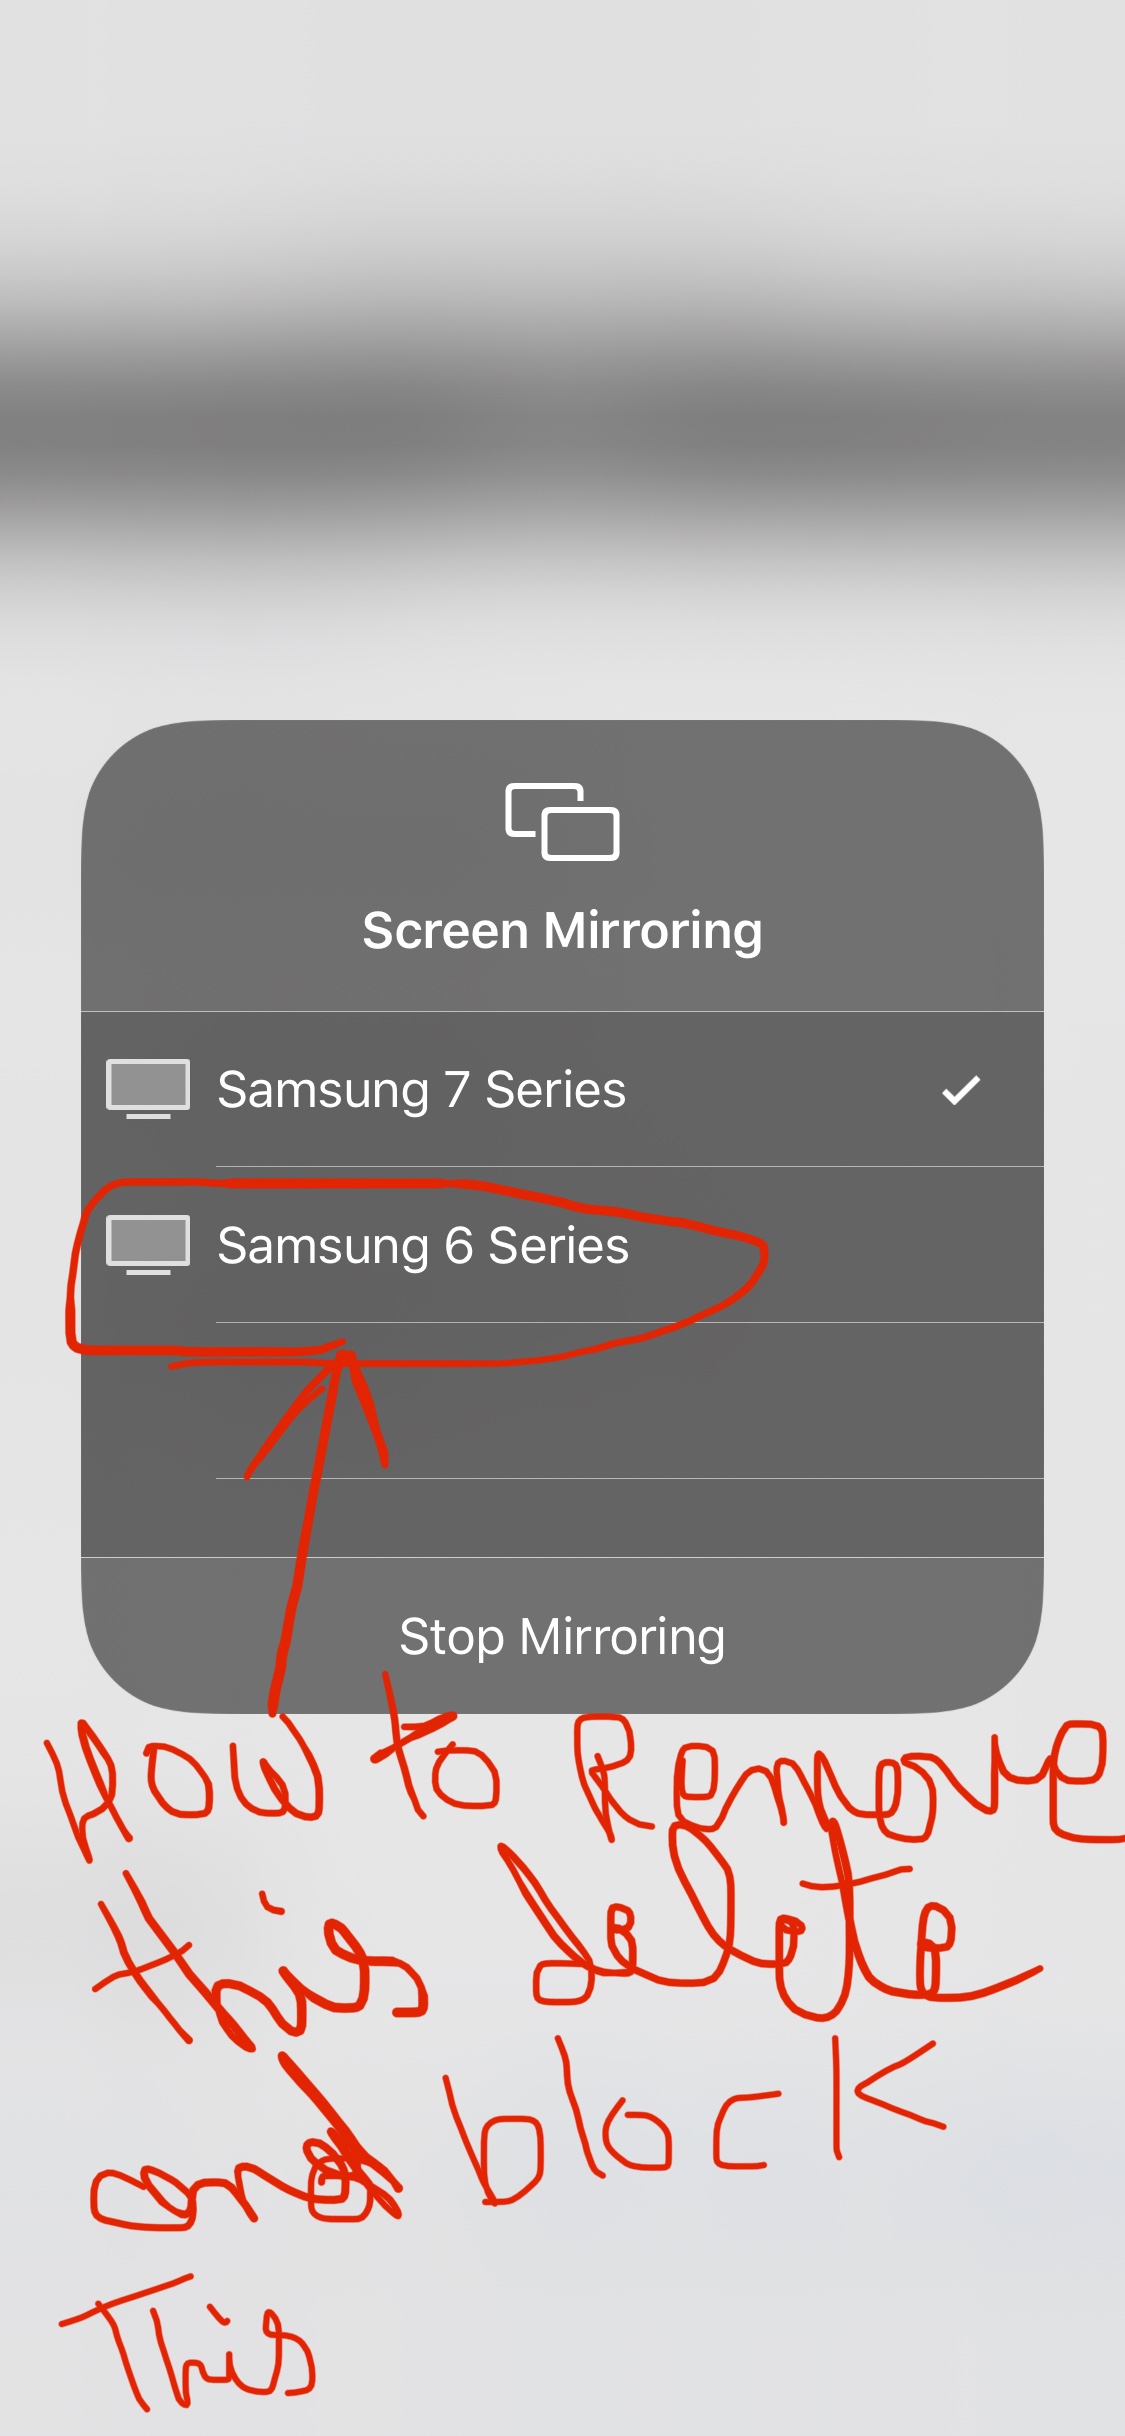 How To Remove Samsung Tv From Iphone, Why Is My Samsung Screen Mirroring Not Working